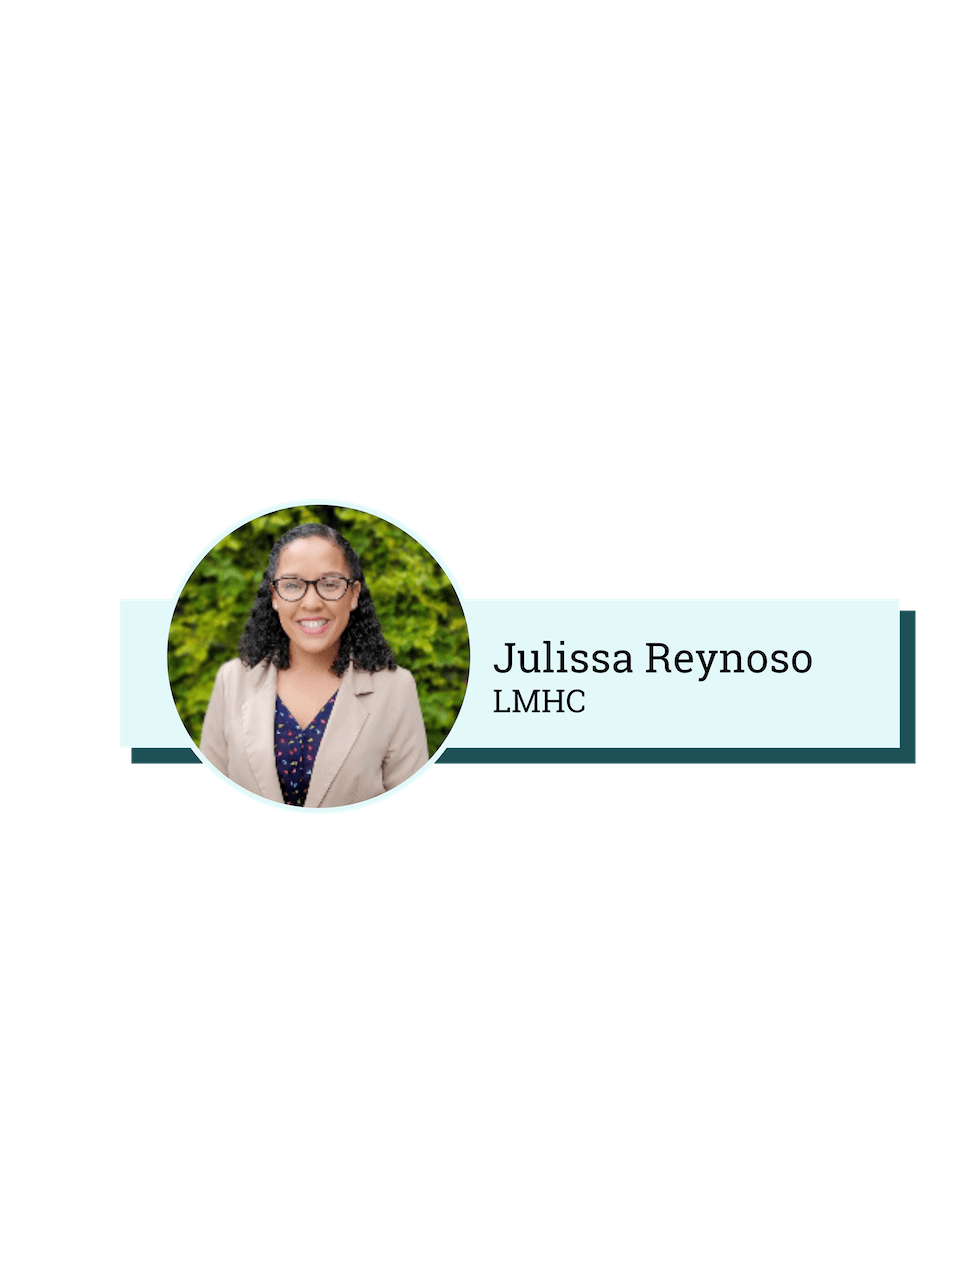 Julissa Reynoso is a BetterHelp counselor who is licensed to help you navigate your issues and help you find necessary connections and access if you need counseling for a specific issue